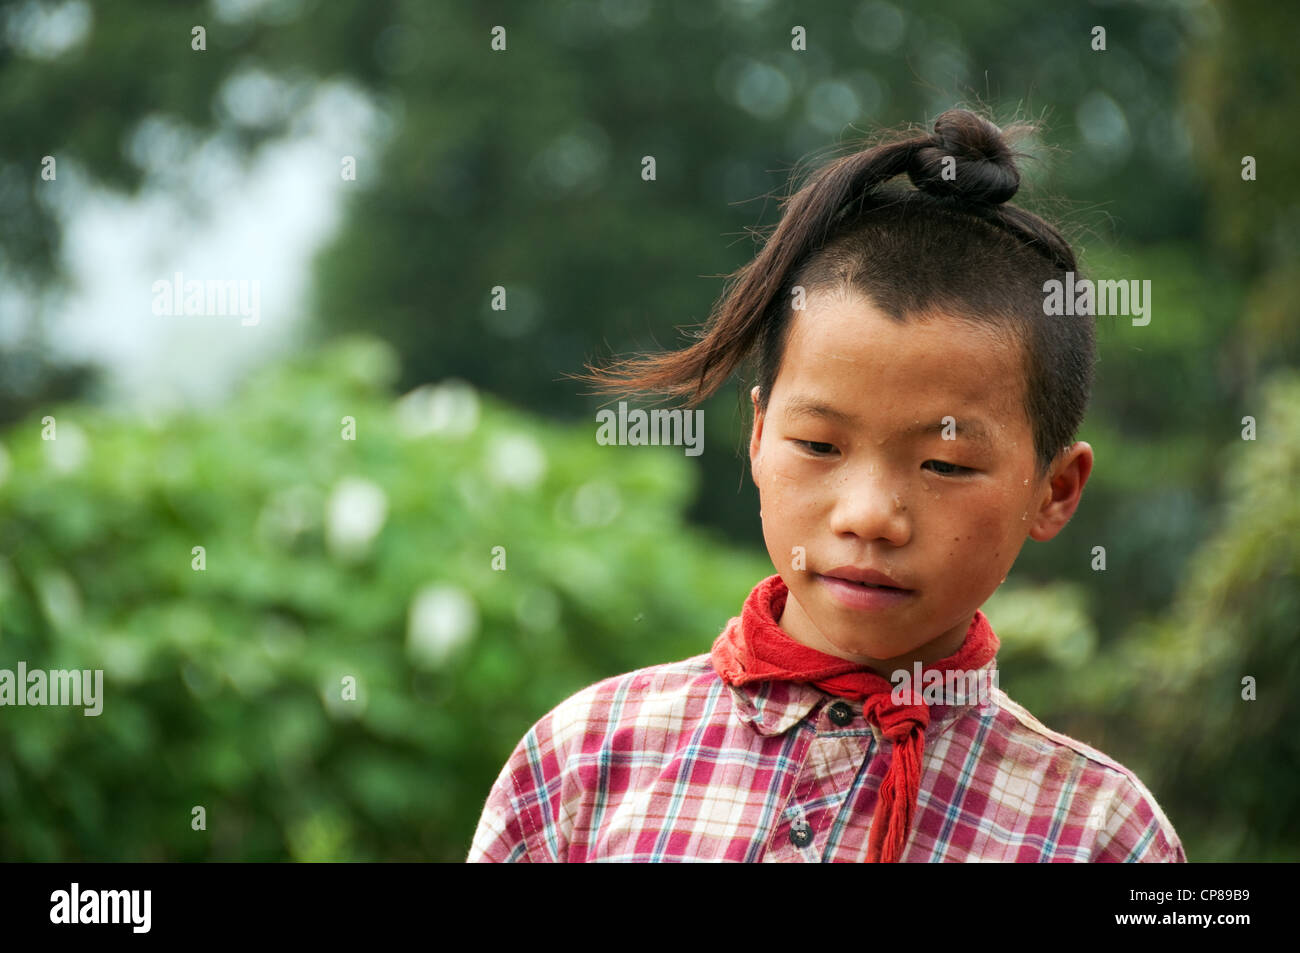 Sweating young Basha Miao (Gun Men) boy with traditional hairstyle and red neckerchief, Southern China Stock Photo